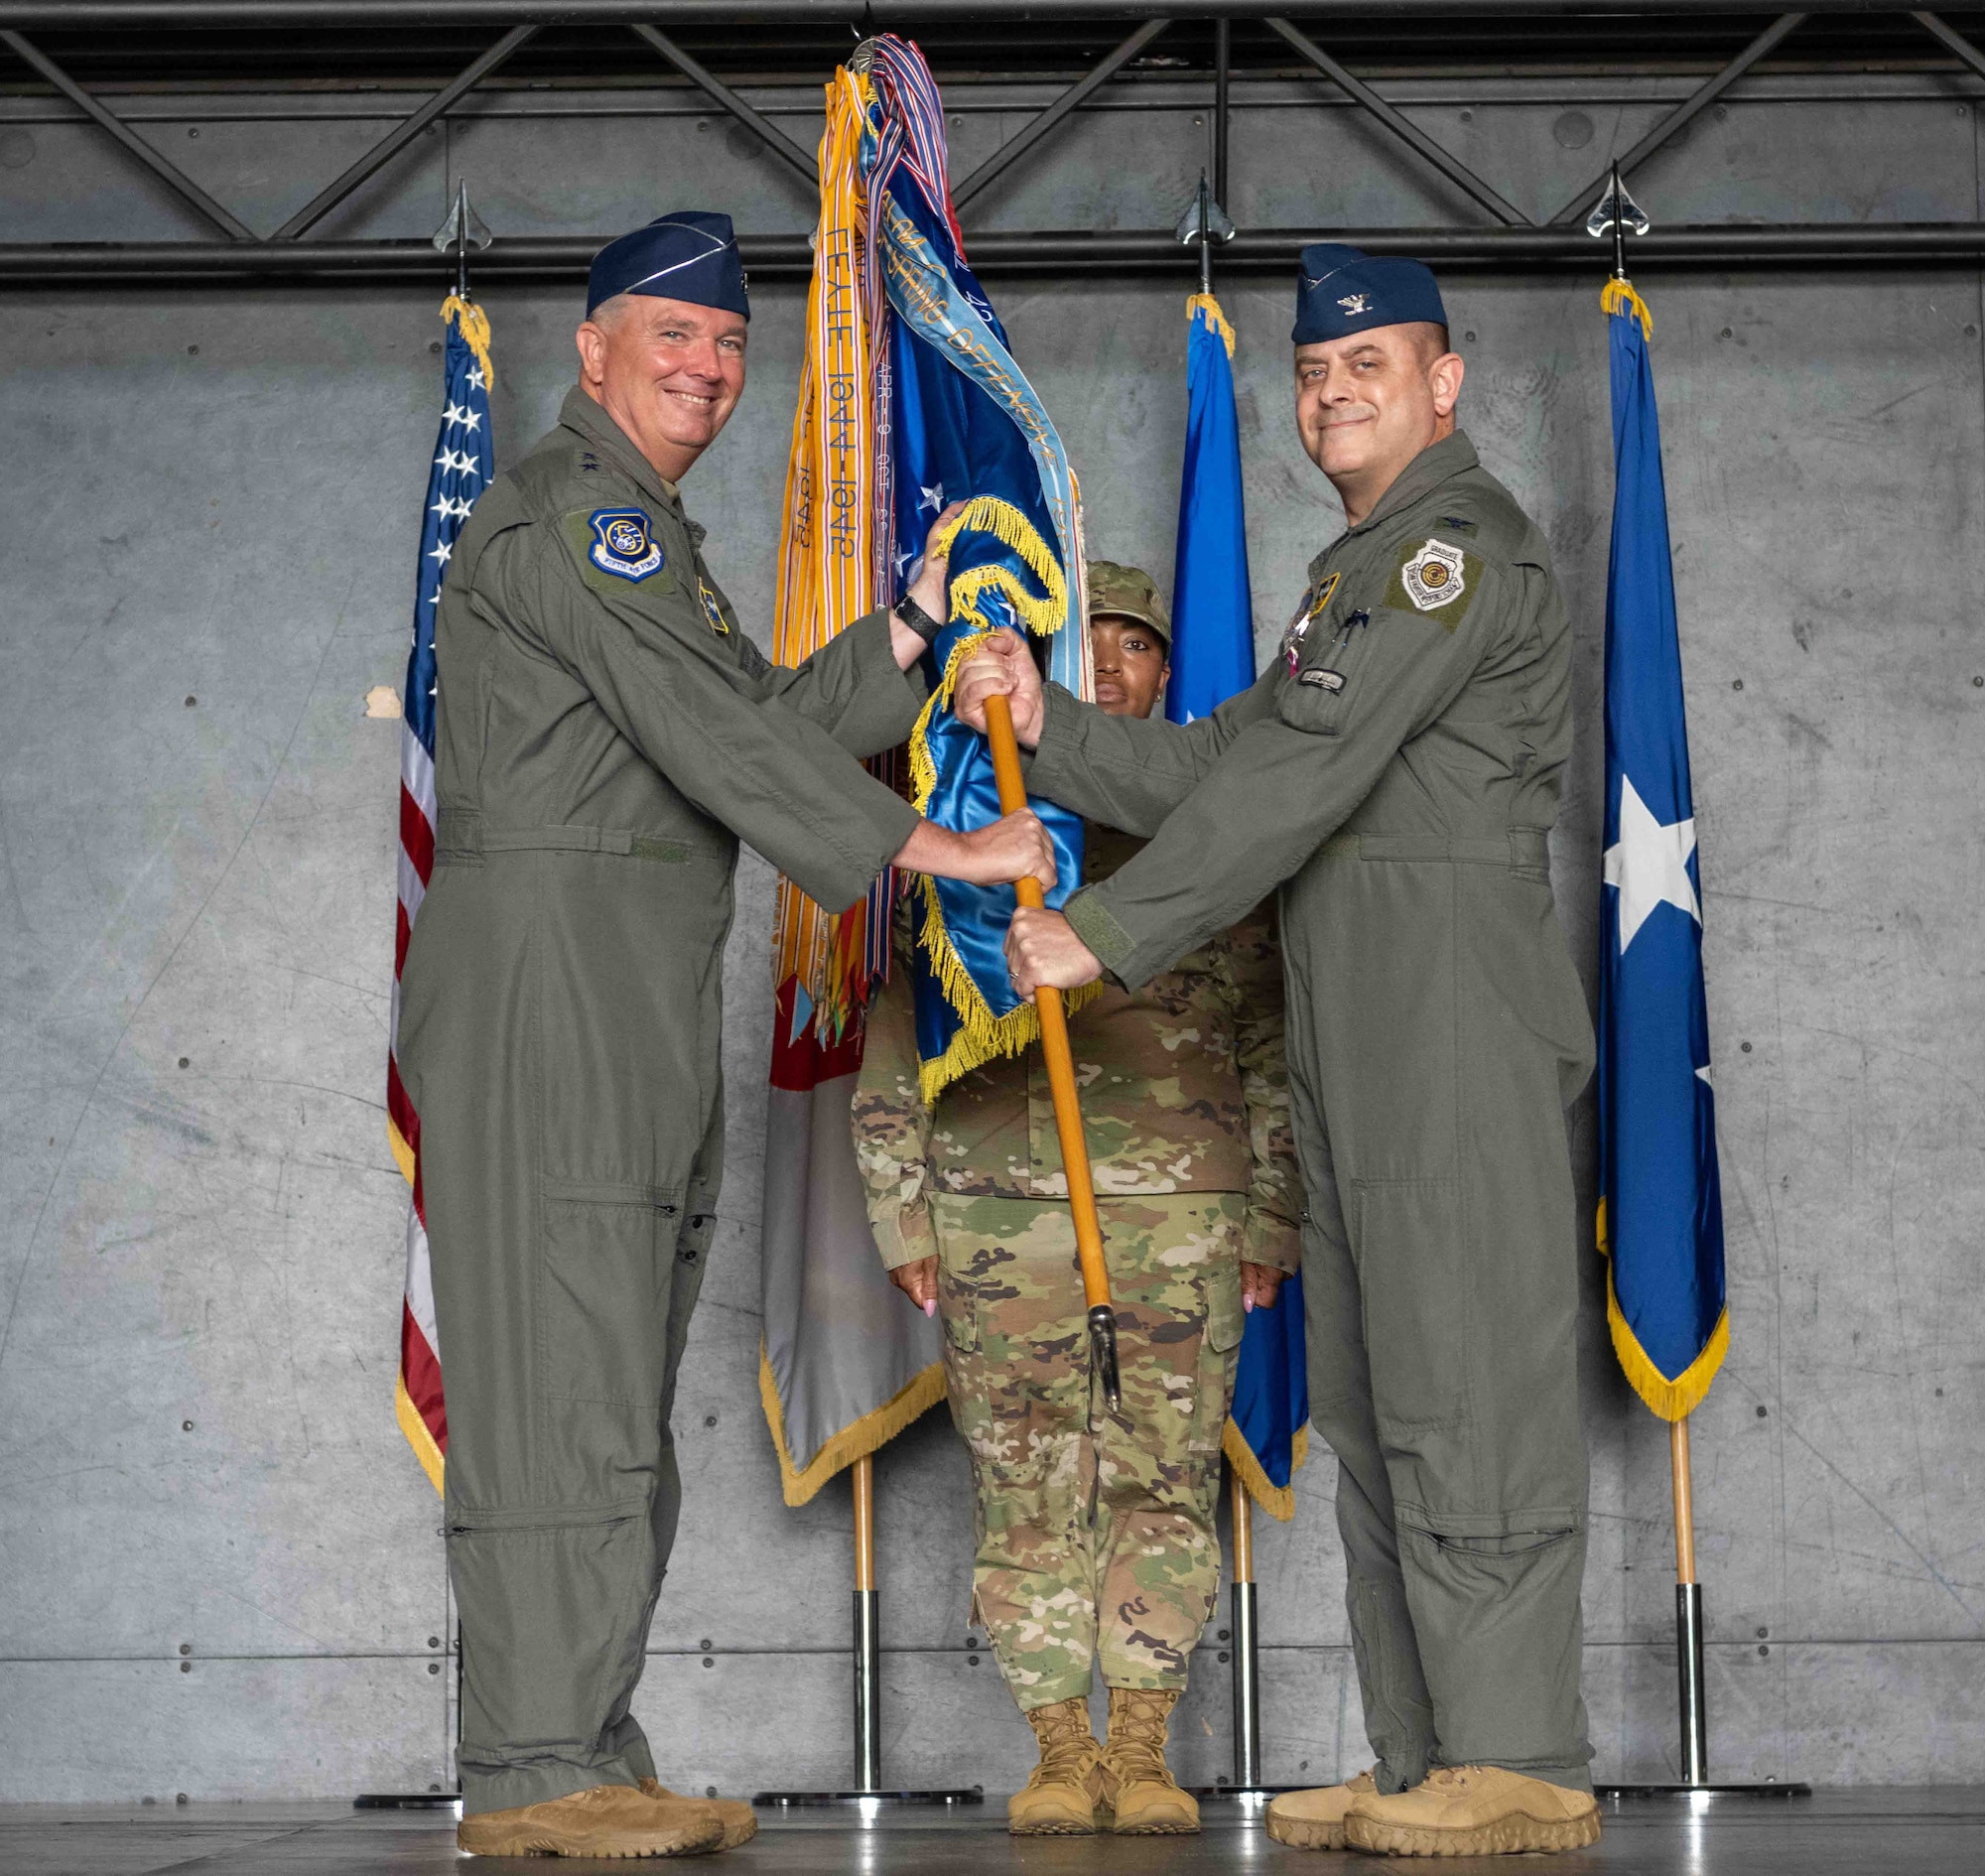 United States Air Force Col. Jesse J. Friedel, right, 35th Fighter Wing (FW) outgoing commander, passes a guidon to Lt. Gen. Ricky N. Rupp, left, U.S. Forces Japan and 5th Air Force commander, during the 35th FW change of command ceremony at Misawa Air Base, Japan, June 30, 2022.